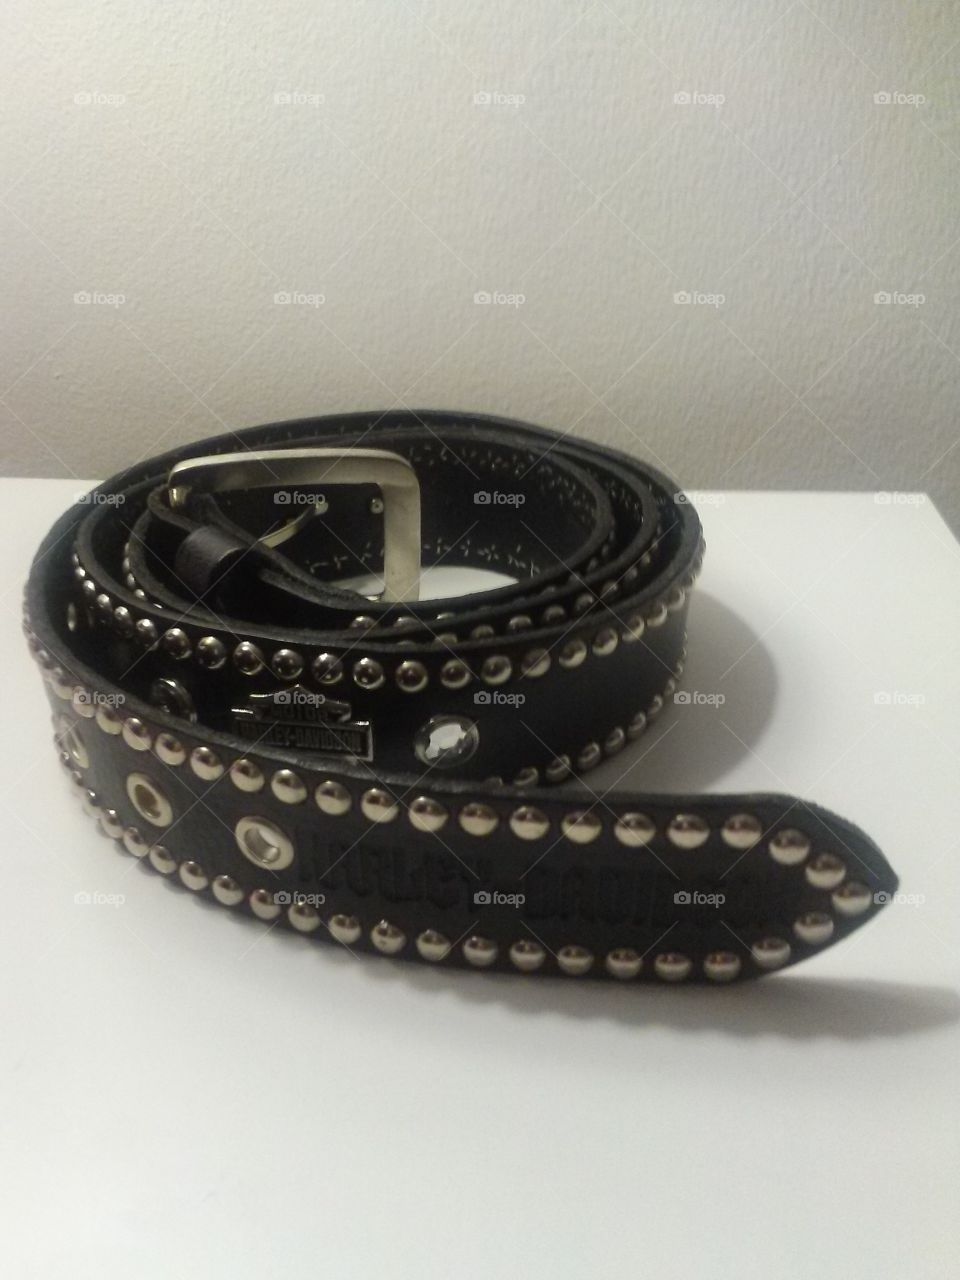 More pics of leather belt